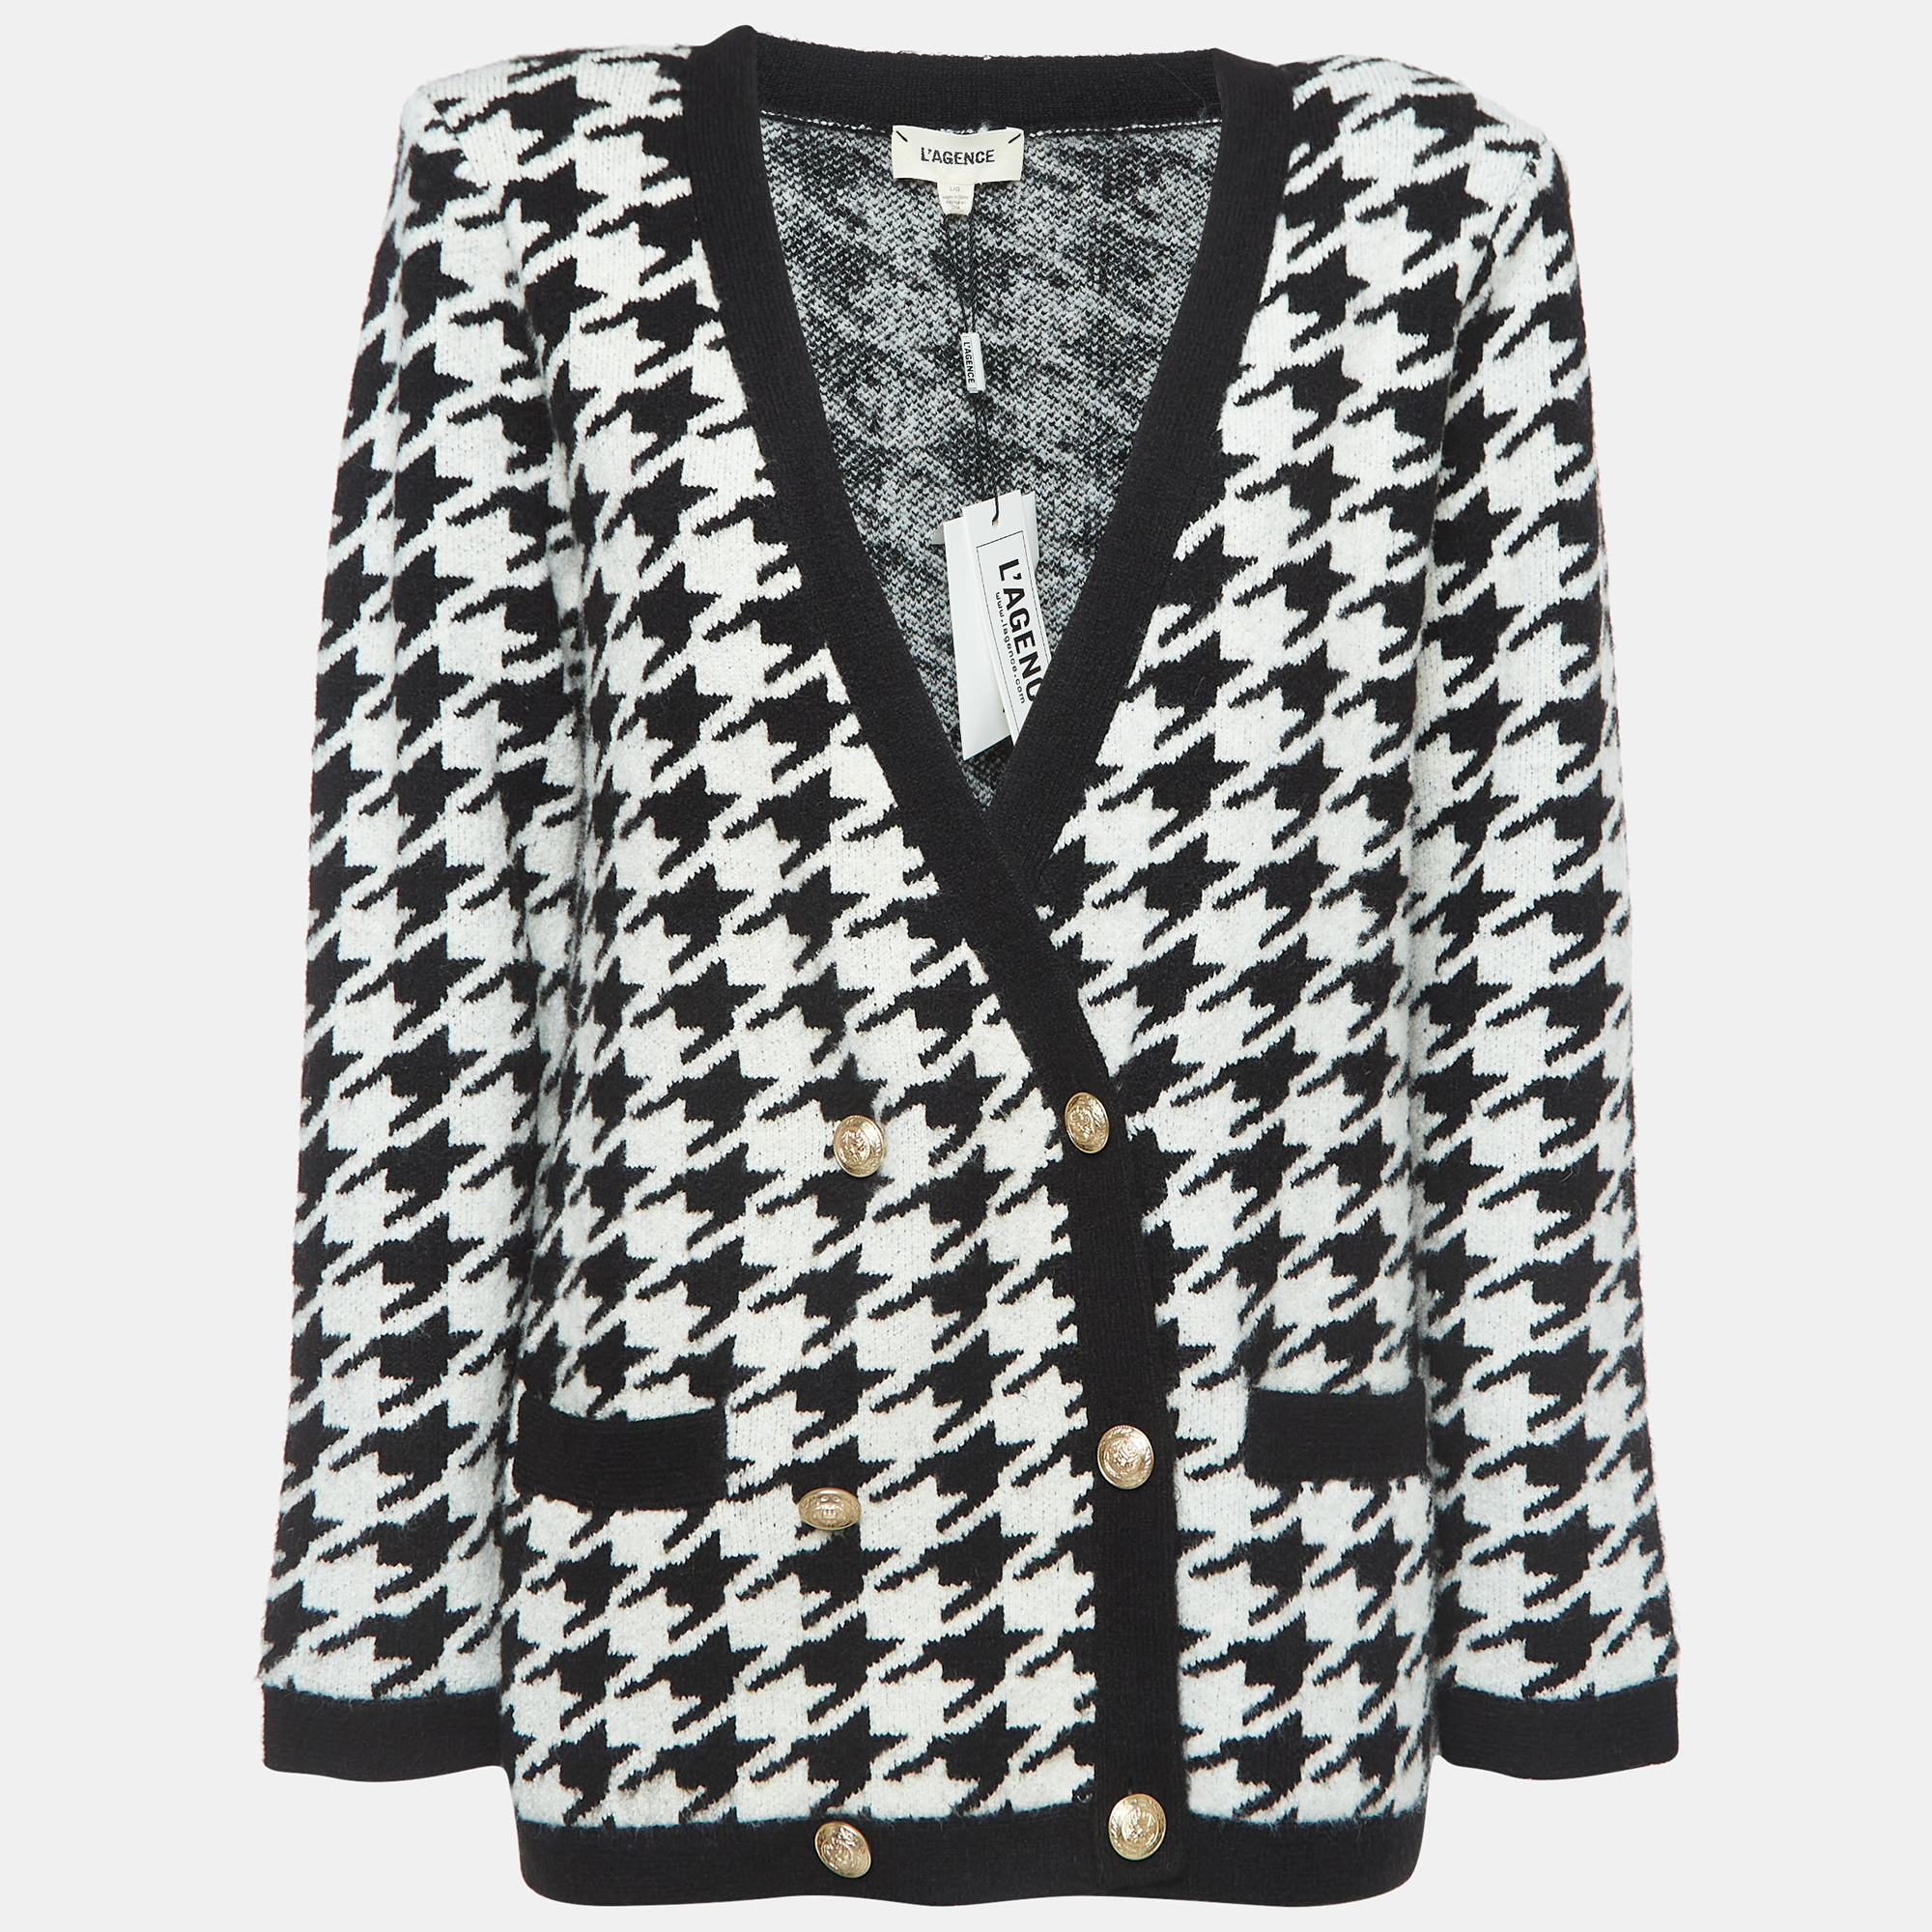 L'agence Black/White Maddy Houndstooth Double Breasted Cardigan L